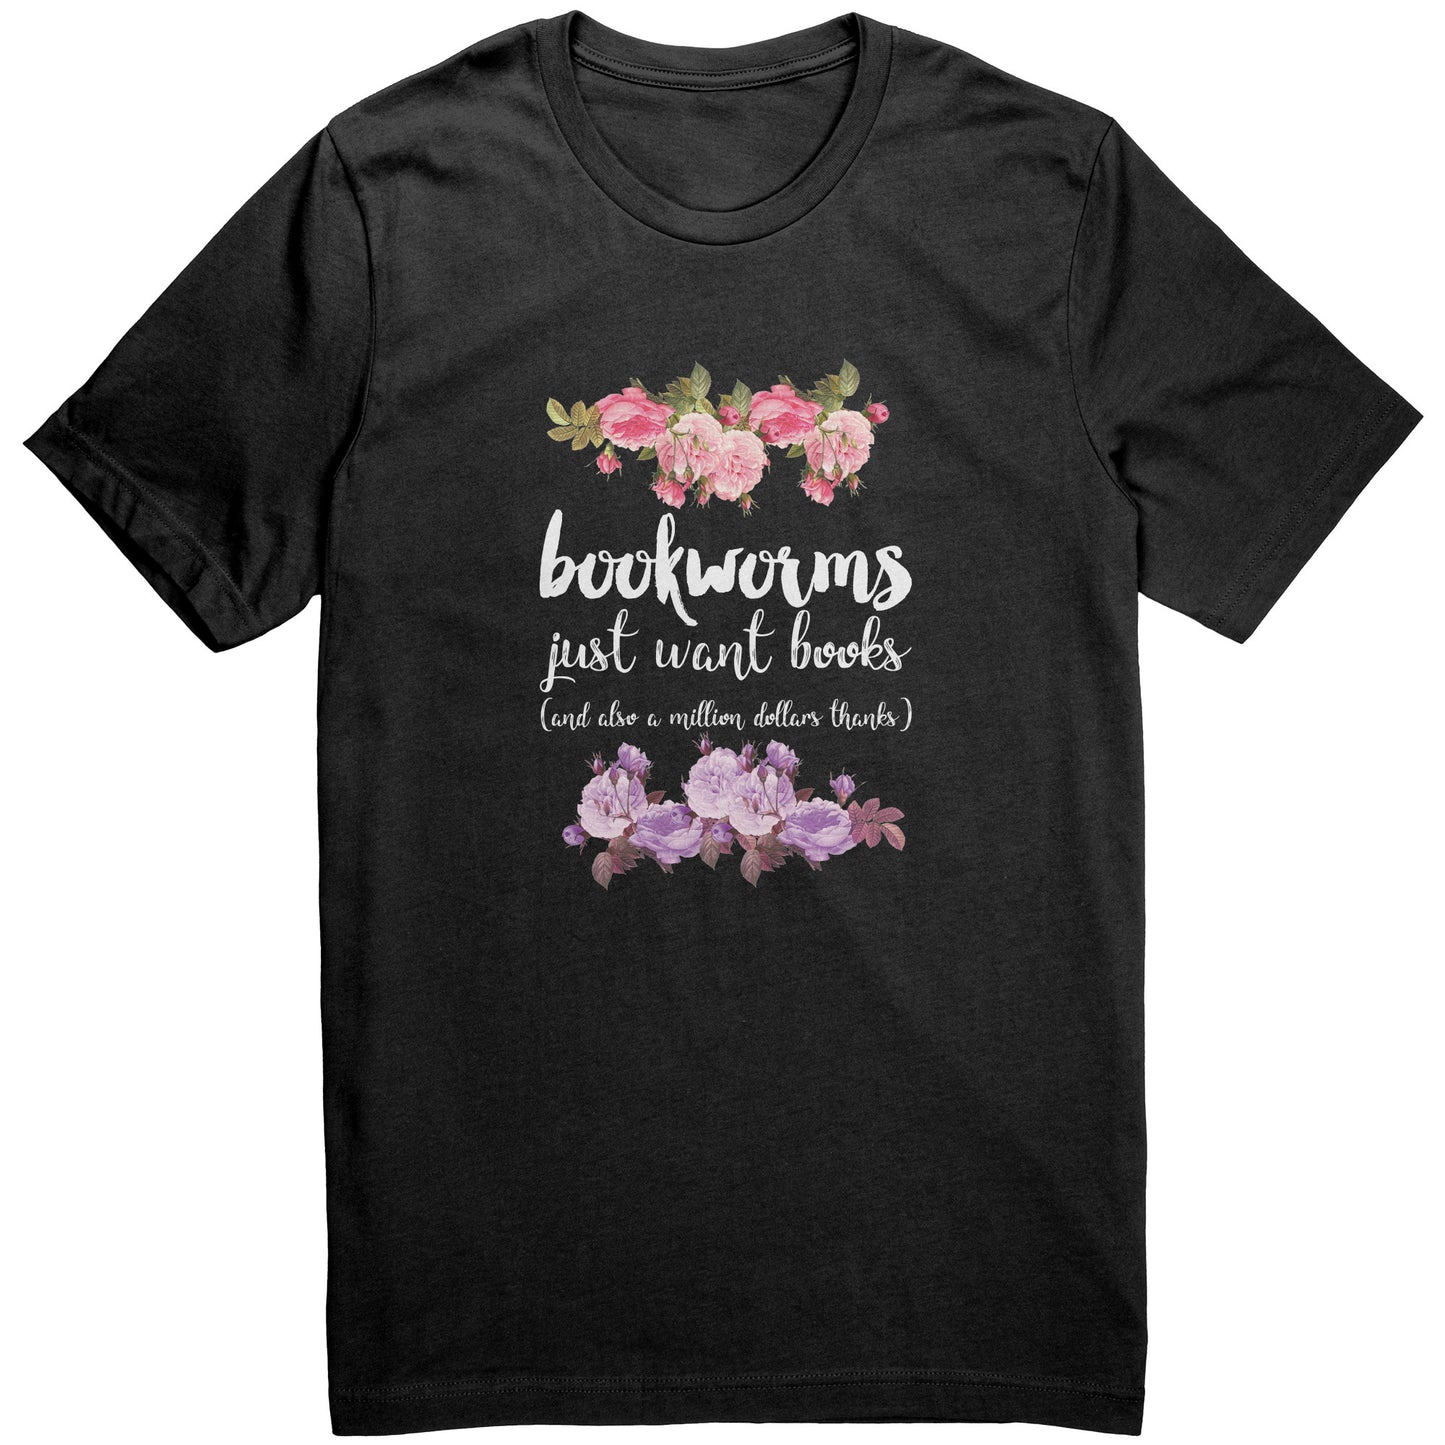 Just Want Books T-shirt